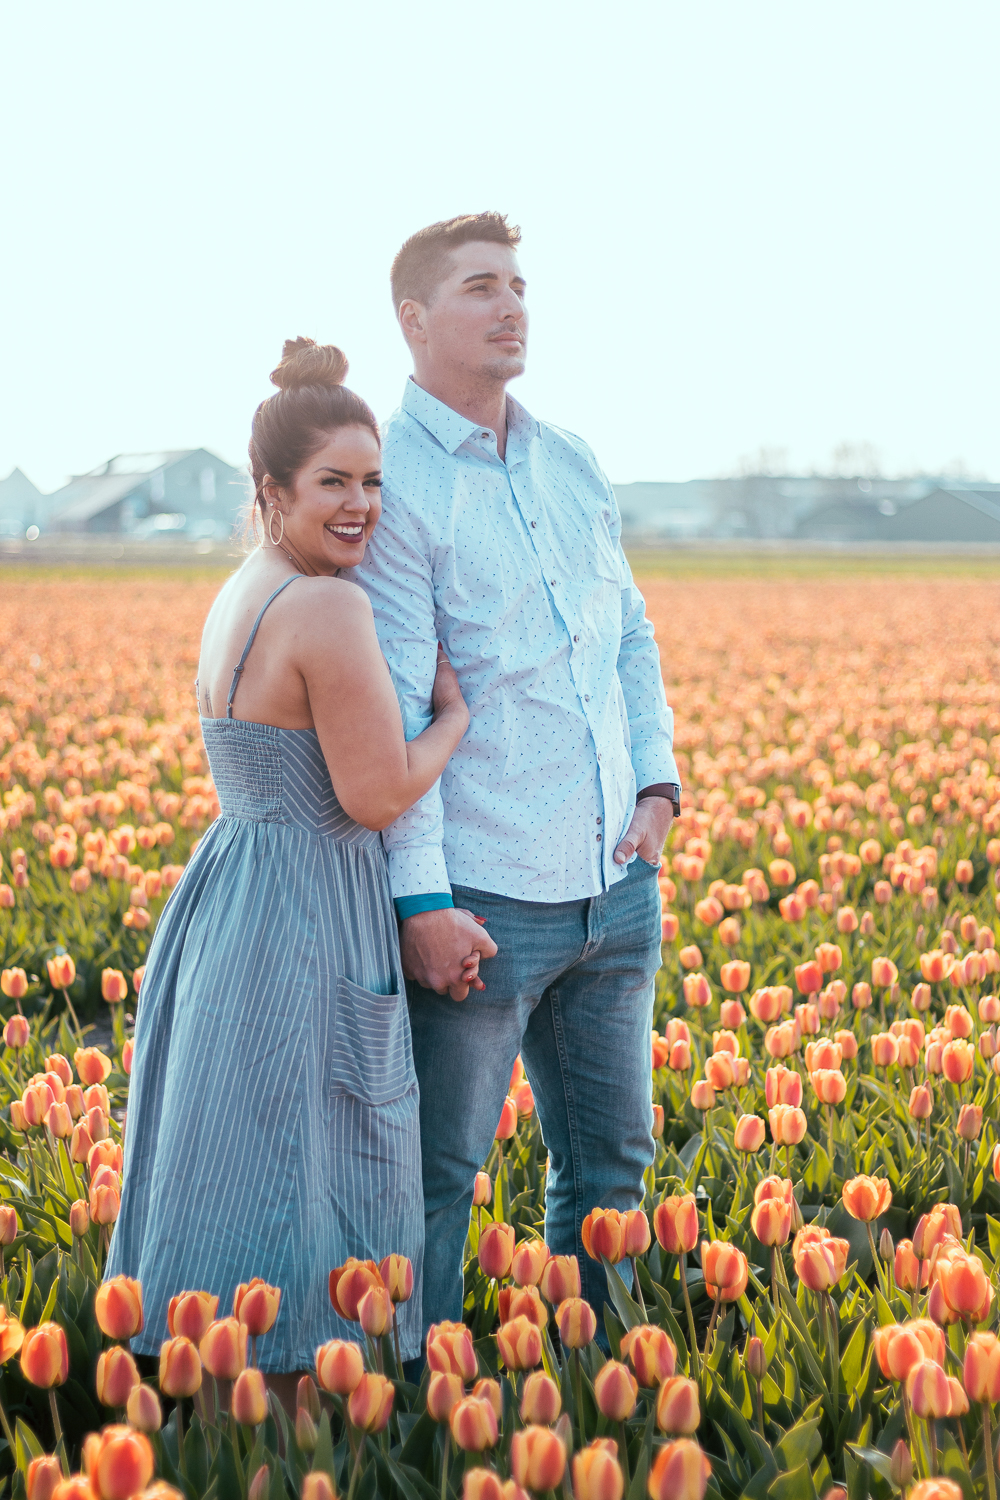 A couple hugging with orange tulip fields as a background.